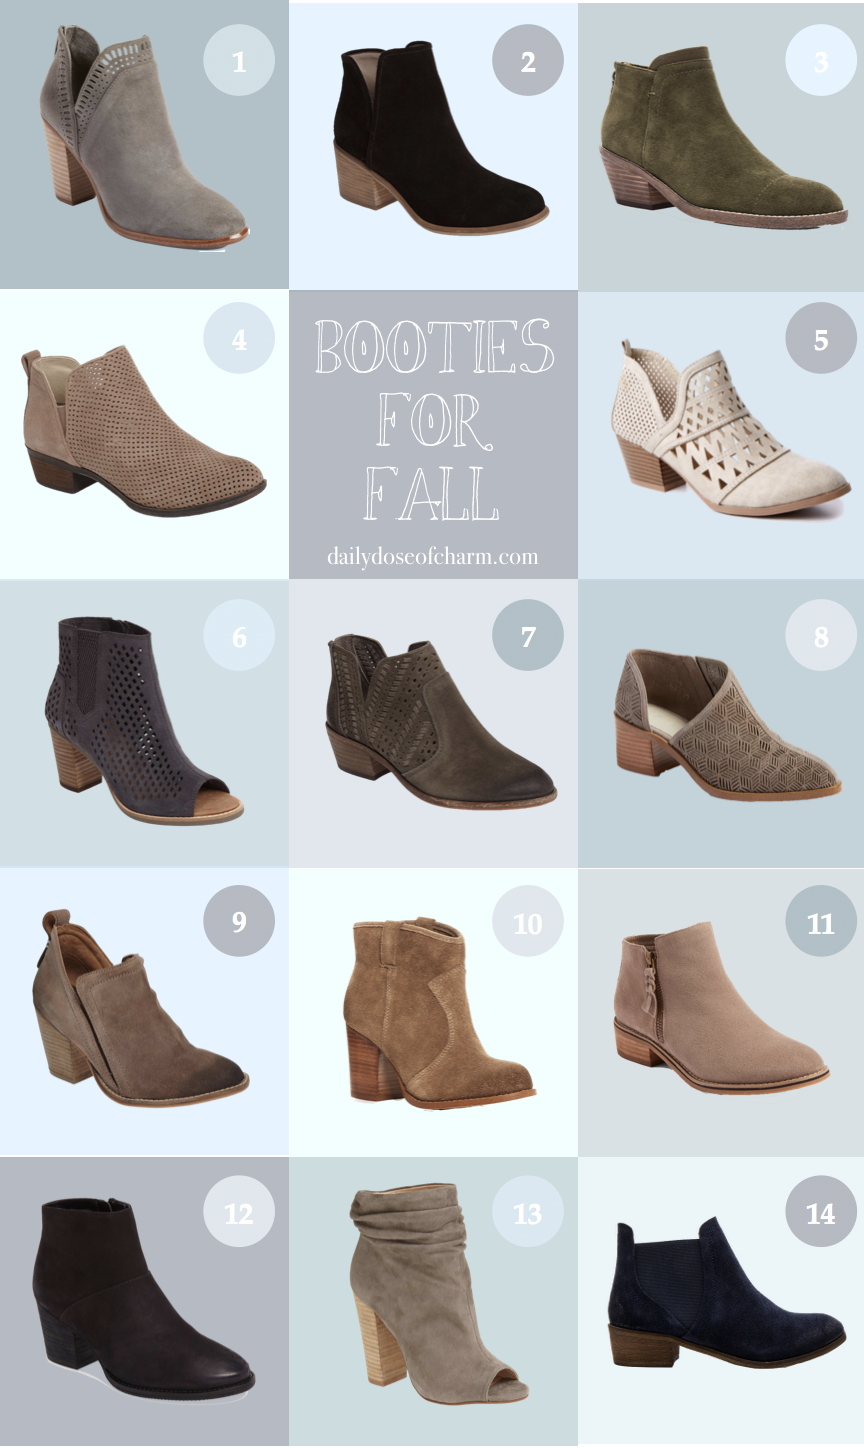 My favorite booties for fall! You can't go wrong with a cute pair of booties, and you can never have too many! On fashion blog daily dose of charm by lauren lindmark